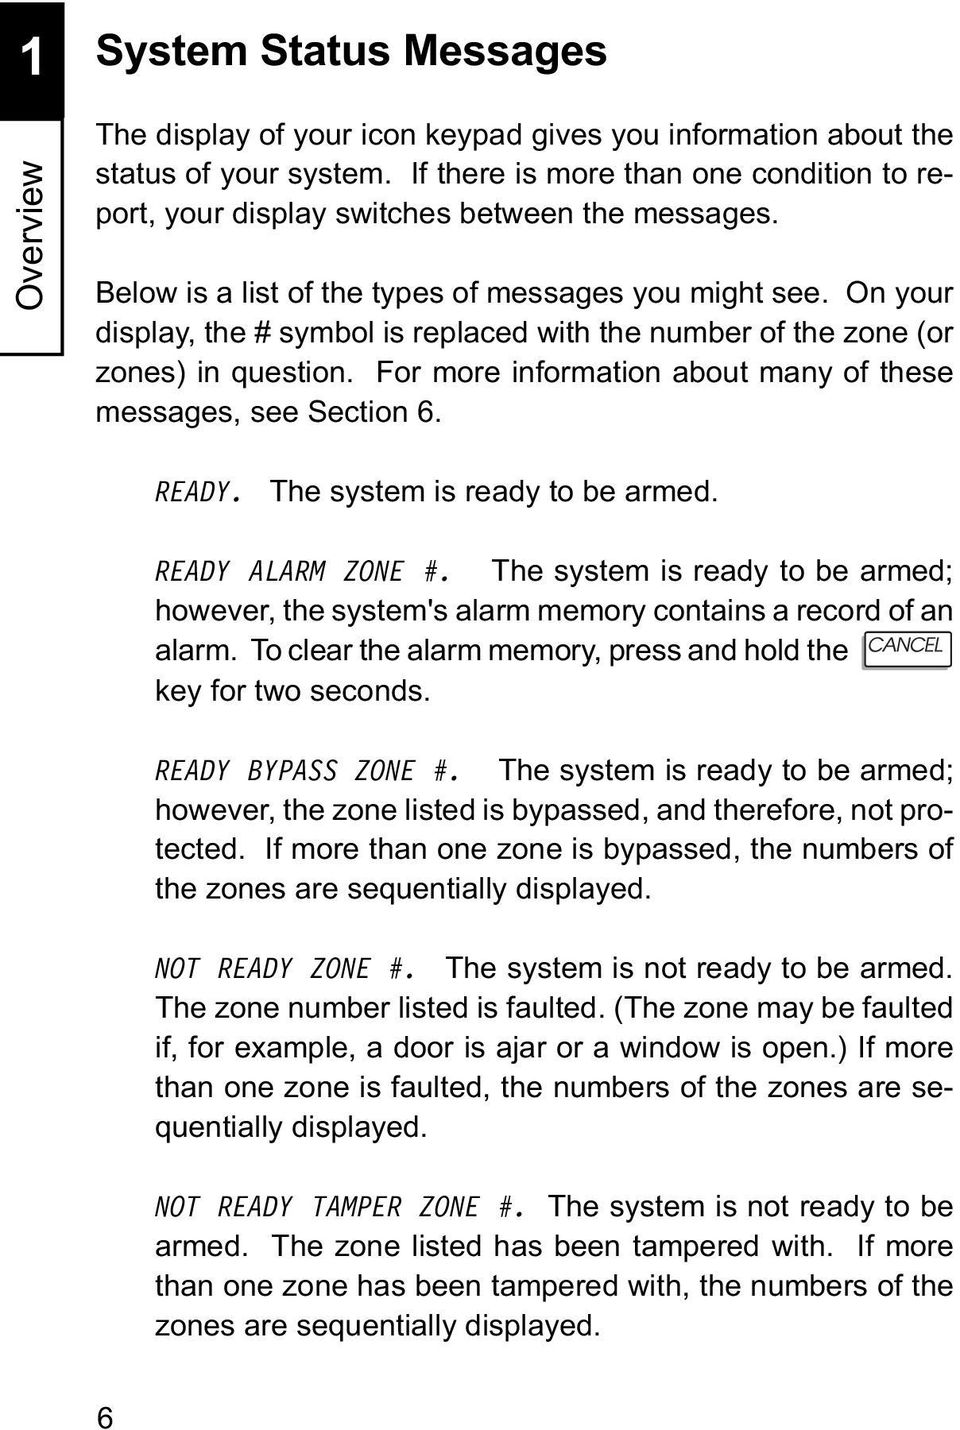 On your display, the # symbol is replaced with the number of the zone (or zones) in question. For more information about many of these messages, see Section 6. READY. The system is ready to be armed.